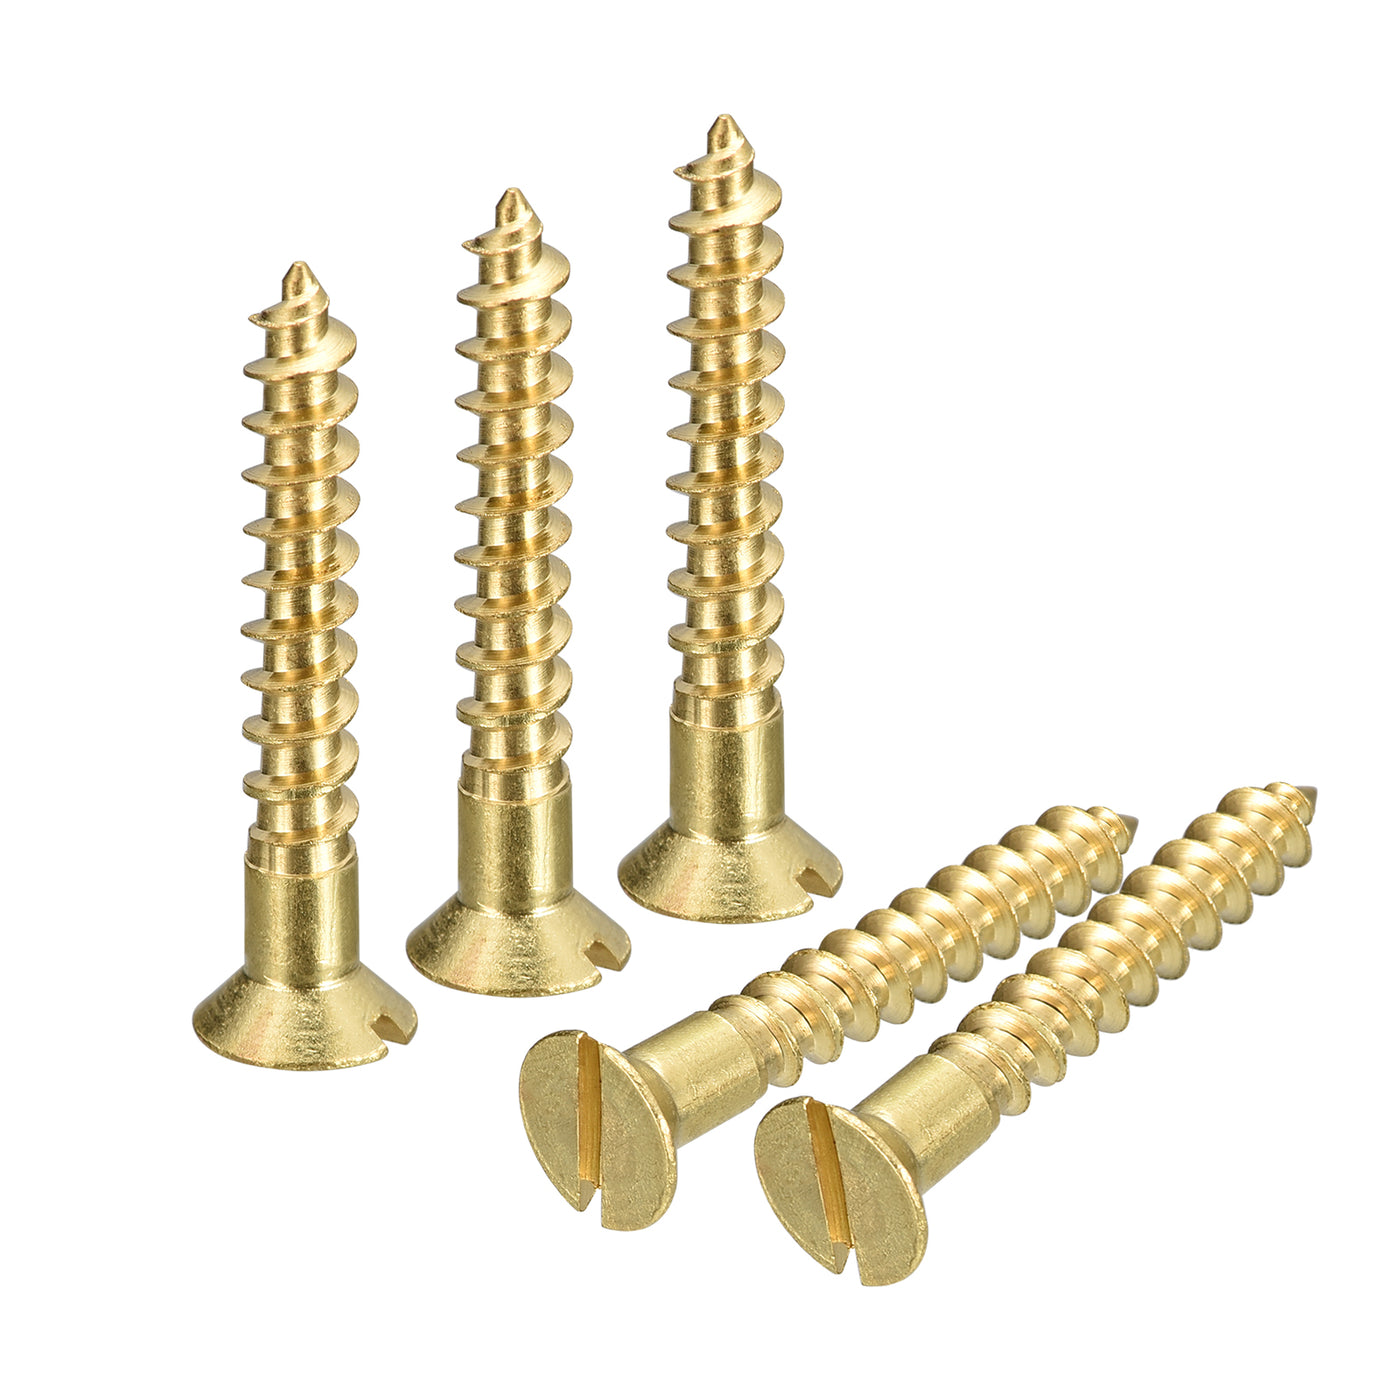 uxcell Uxcell 25Pcs M4.5 x 30mm Brass Slotted Drive Flat Head Wood Screws Self Tapping Screw